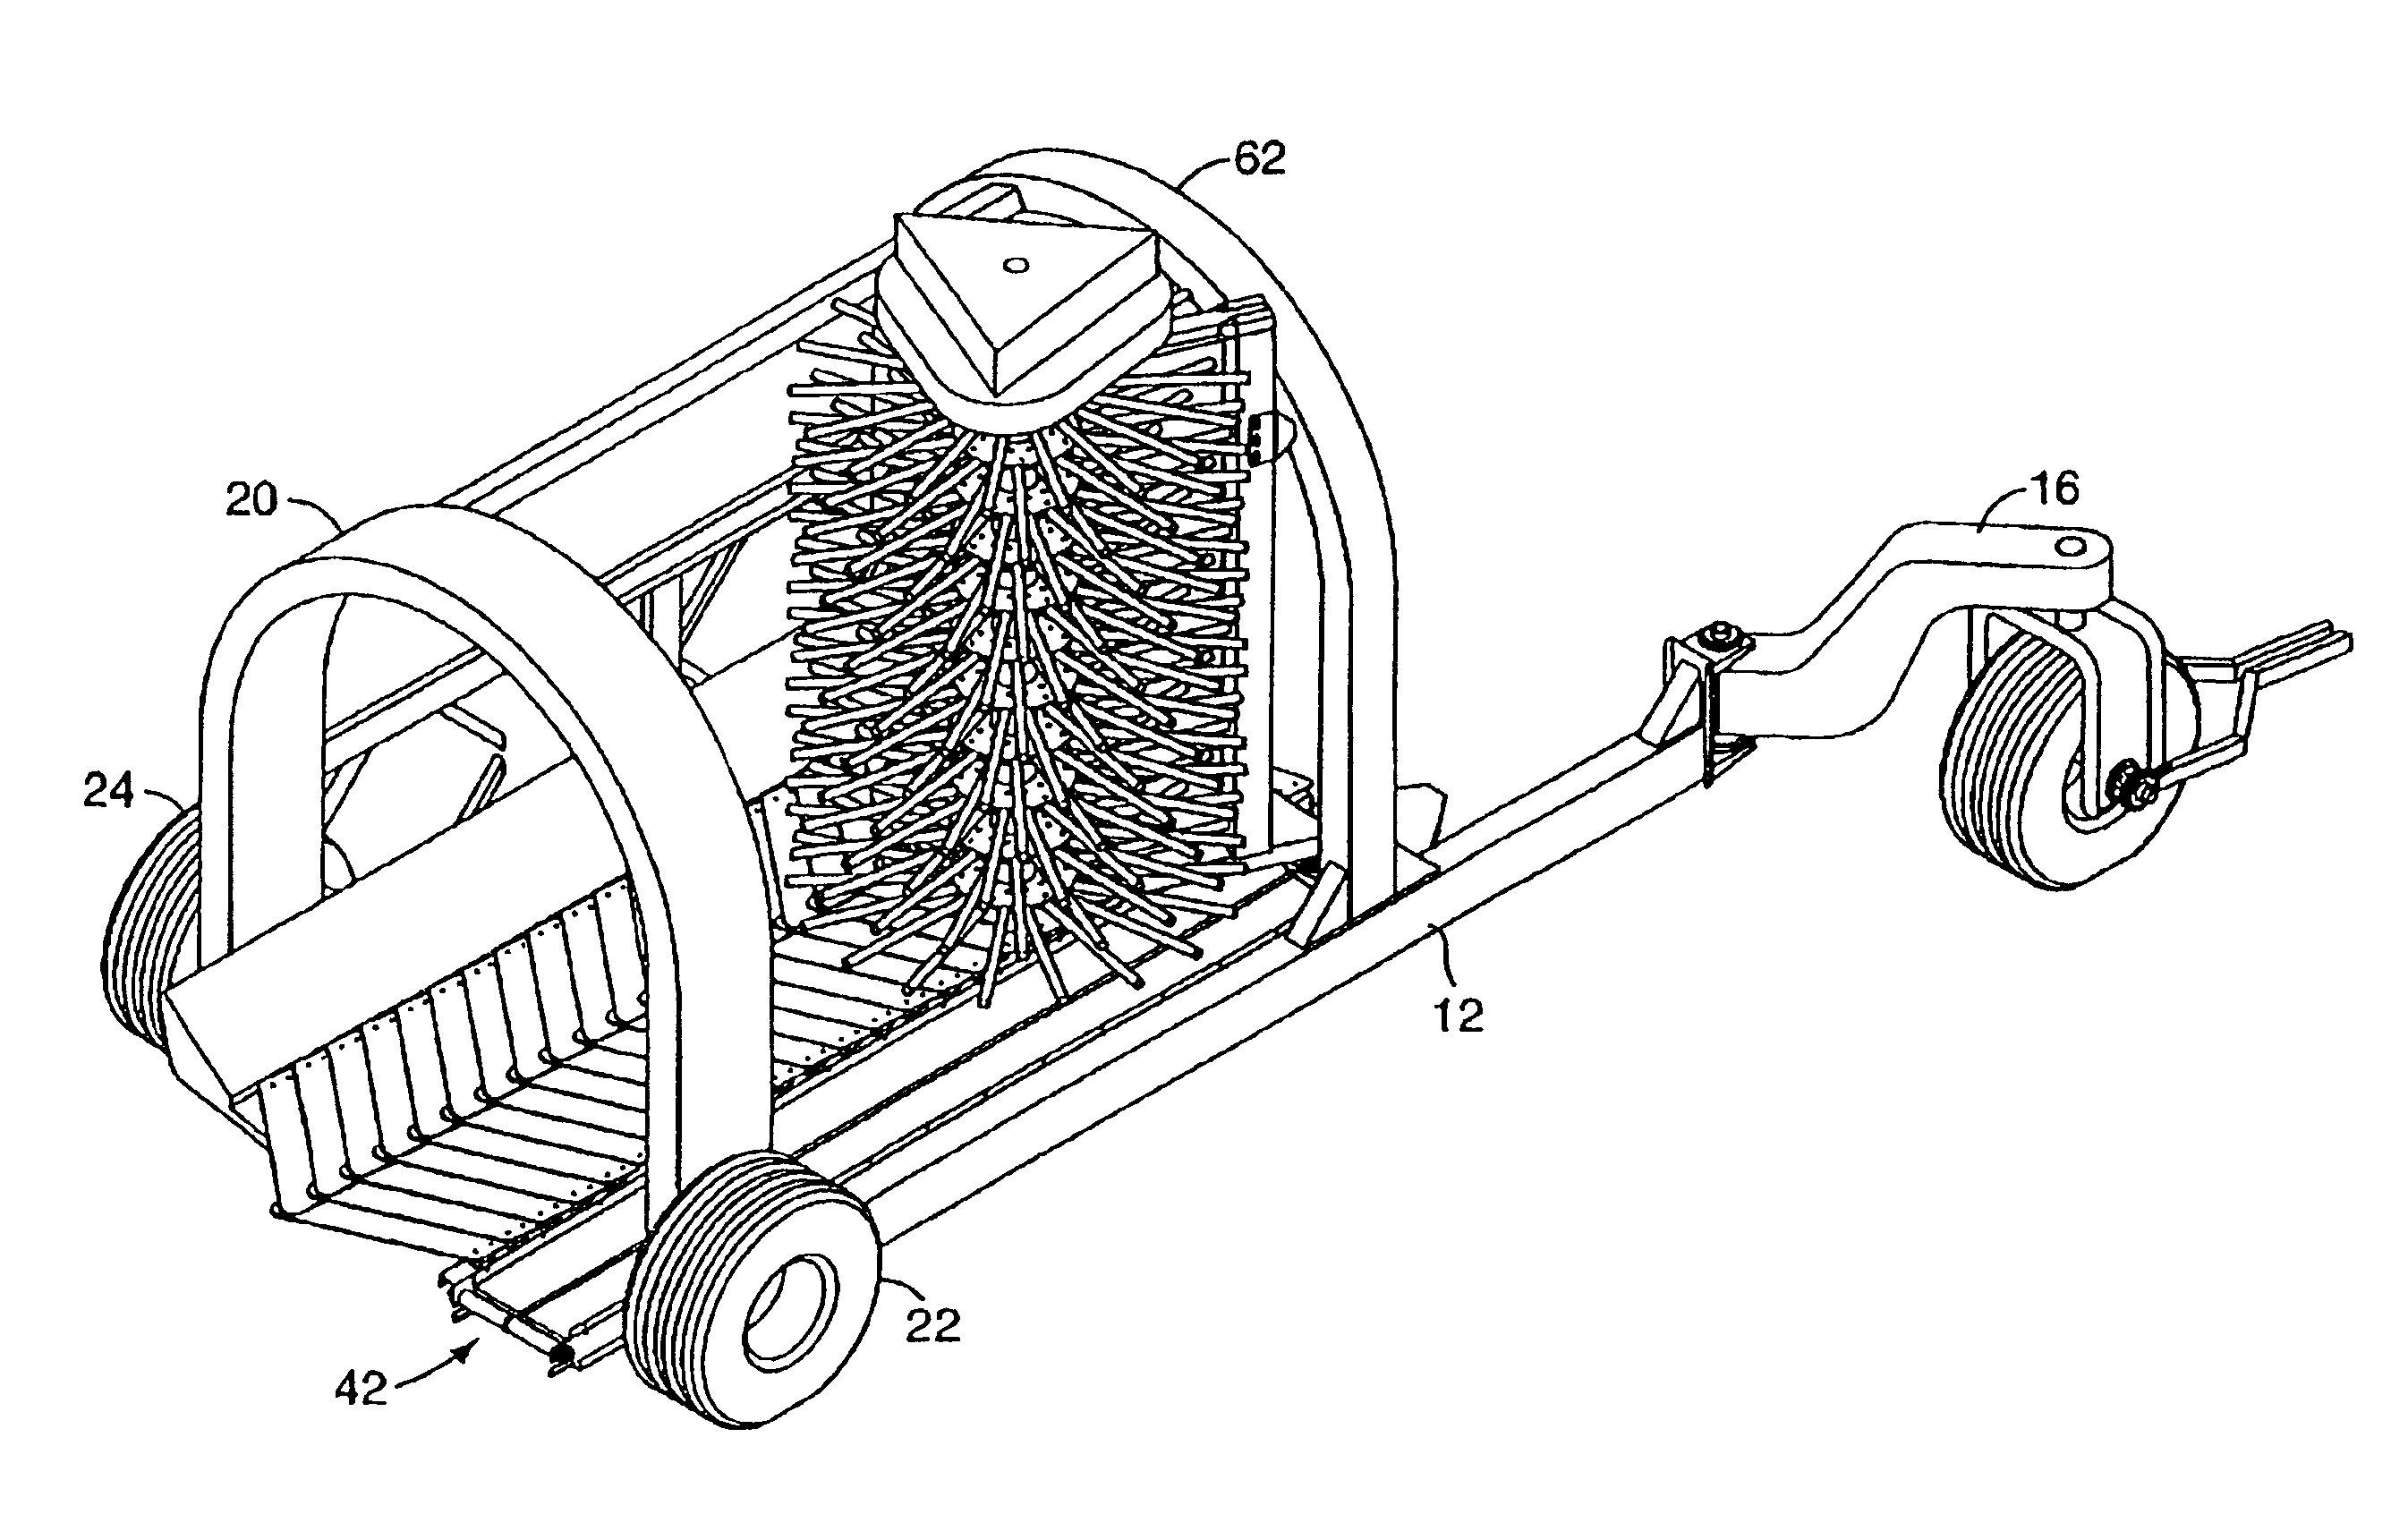 Over-the-row single sided harvester